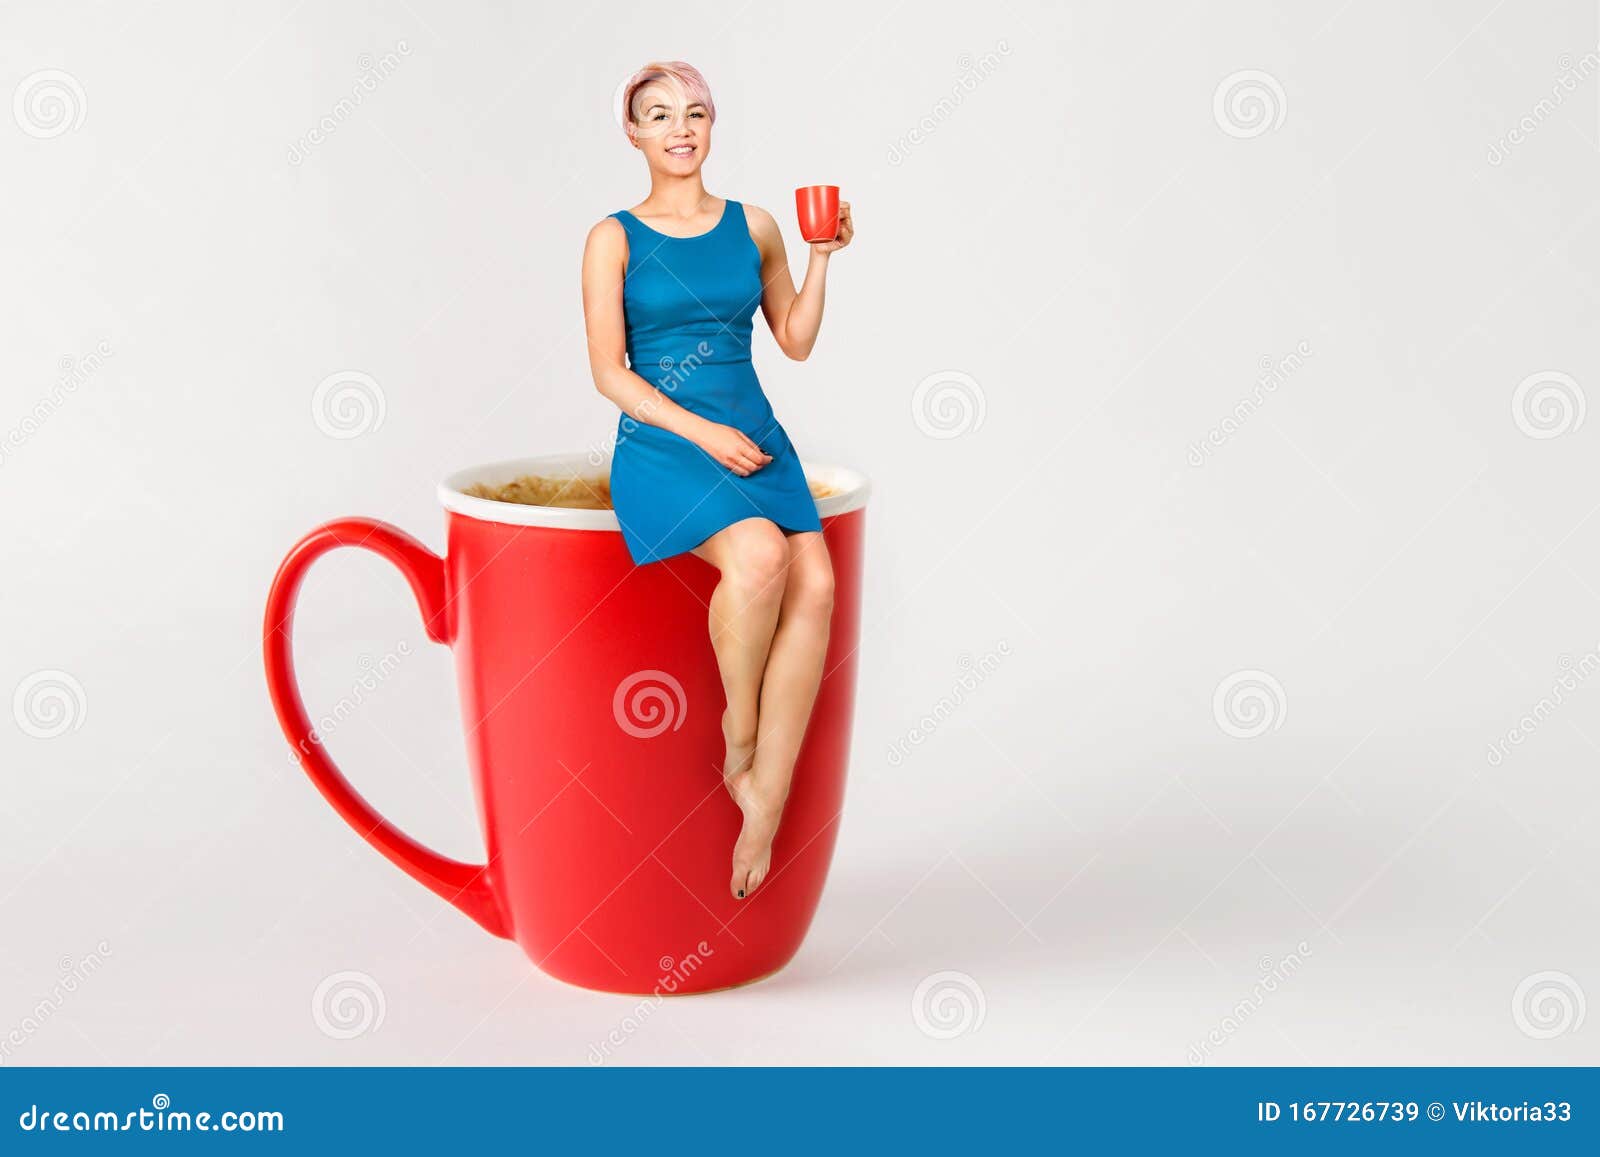 Young Beautiful Girl Sits on a Big Cup of Coffee and Drinks Coffee on a  Light Background Stock Image - Image of cafe, cappuccino: 167726739